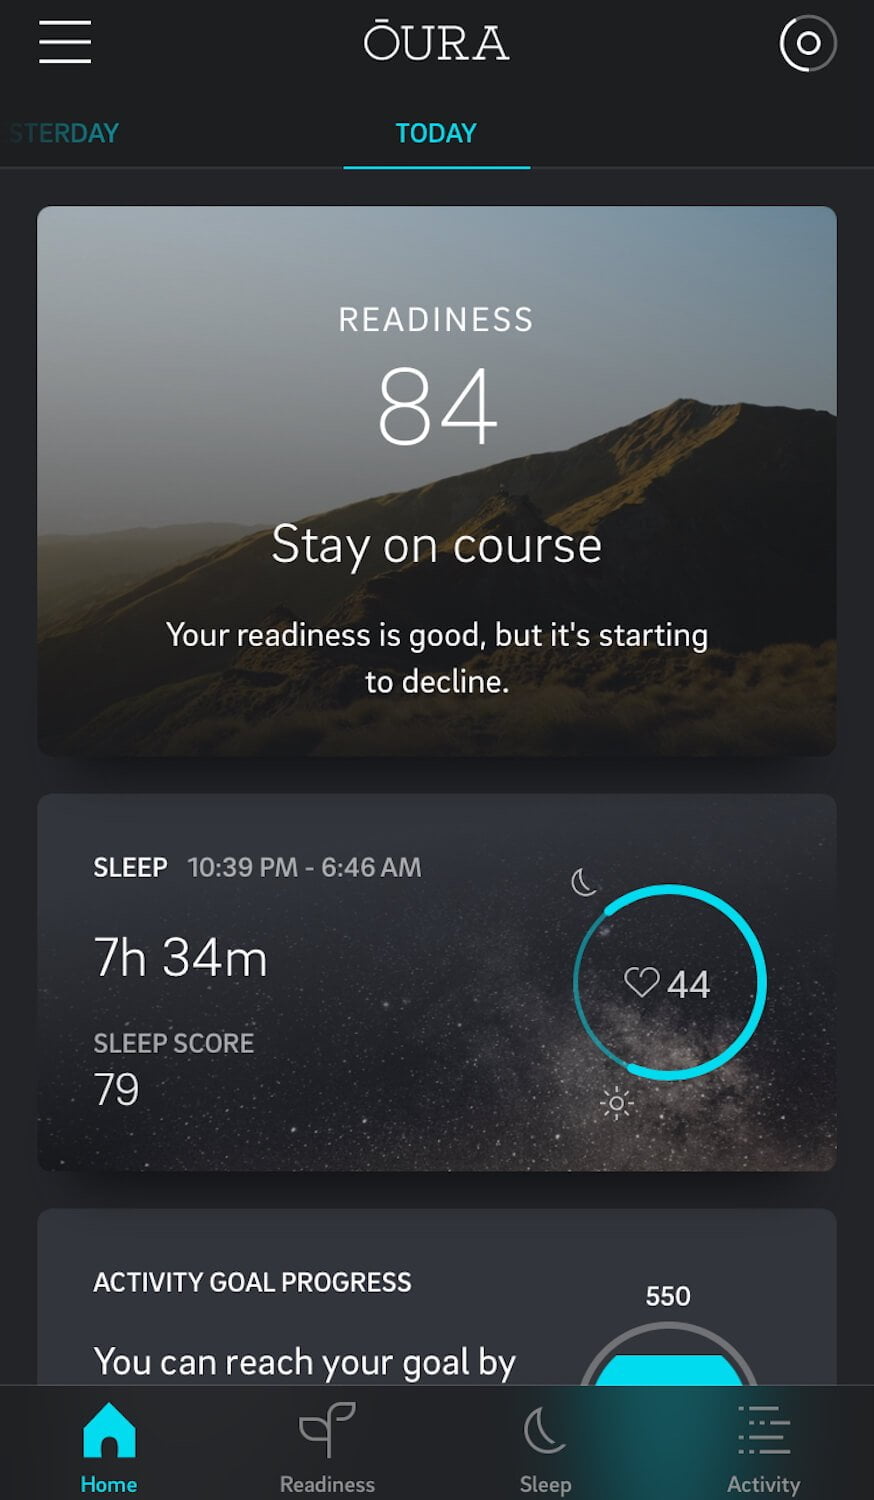 Home screen of the Oura Ring's app